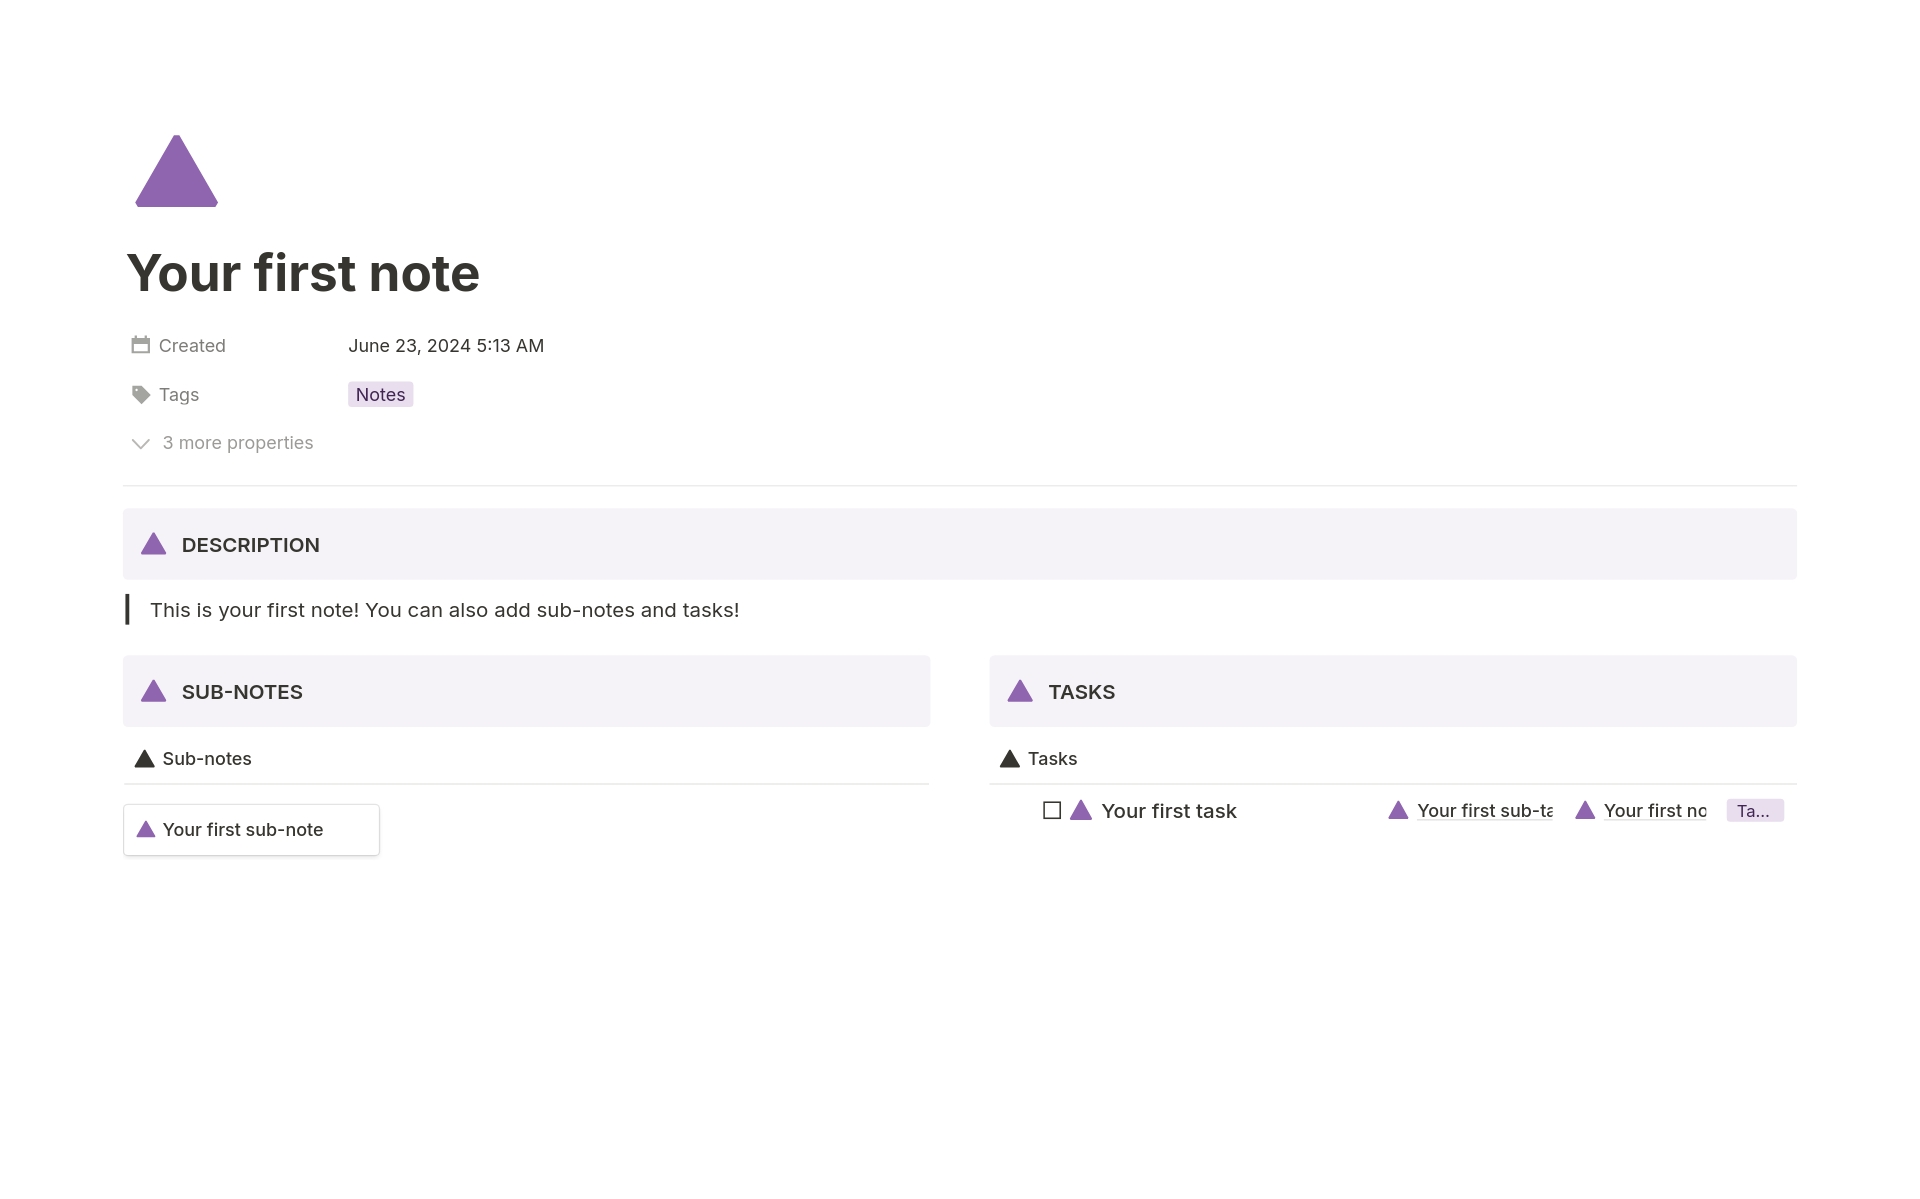 Boost your productivity with this versatile Notion template! Create and manage multiple notebooks, each housing notes and tasks. Notes can include sub-notes and tasks, while tasks can have sub-tasks and additional notes. Perfect for professionals and students.